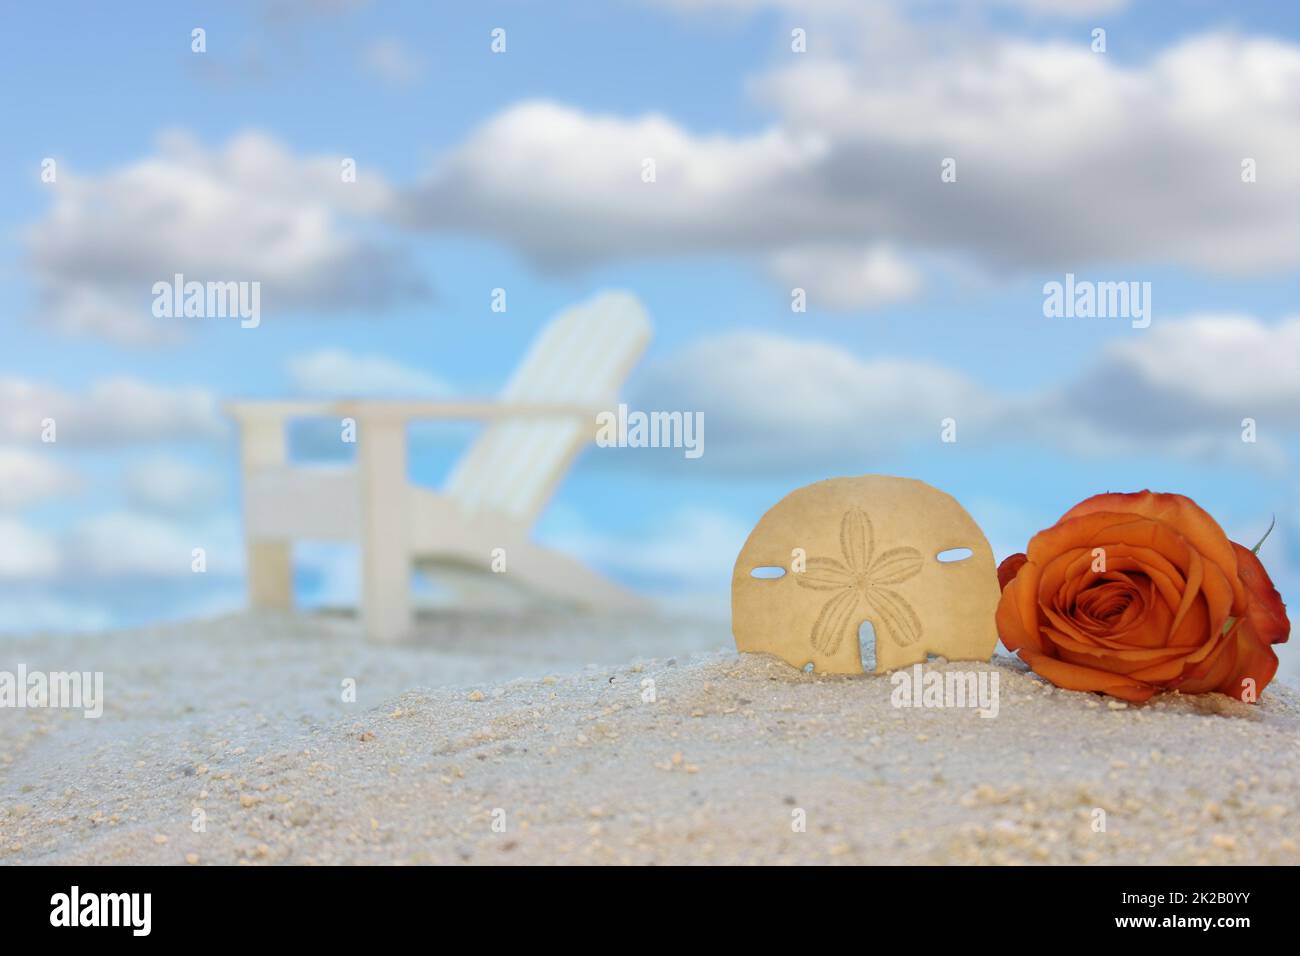 Sea Shell and Flower on Beach With Lounge Chair in Background Stock Photo